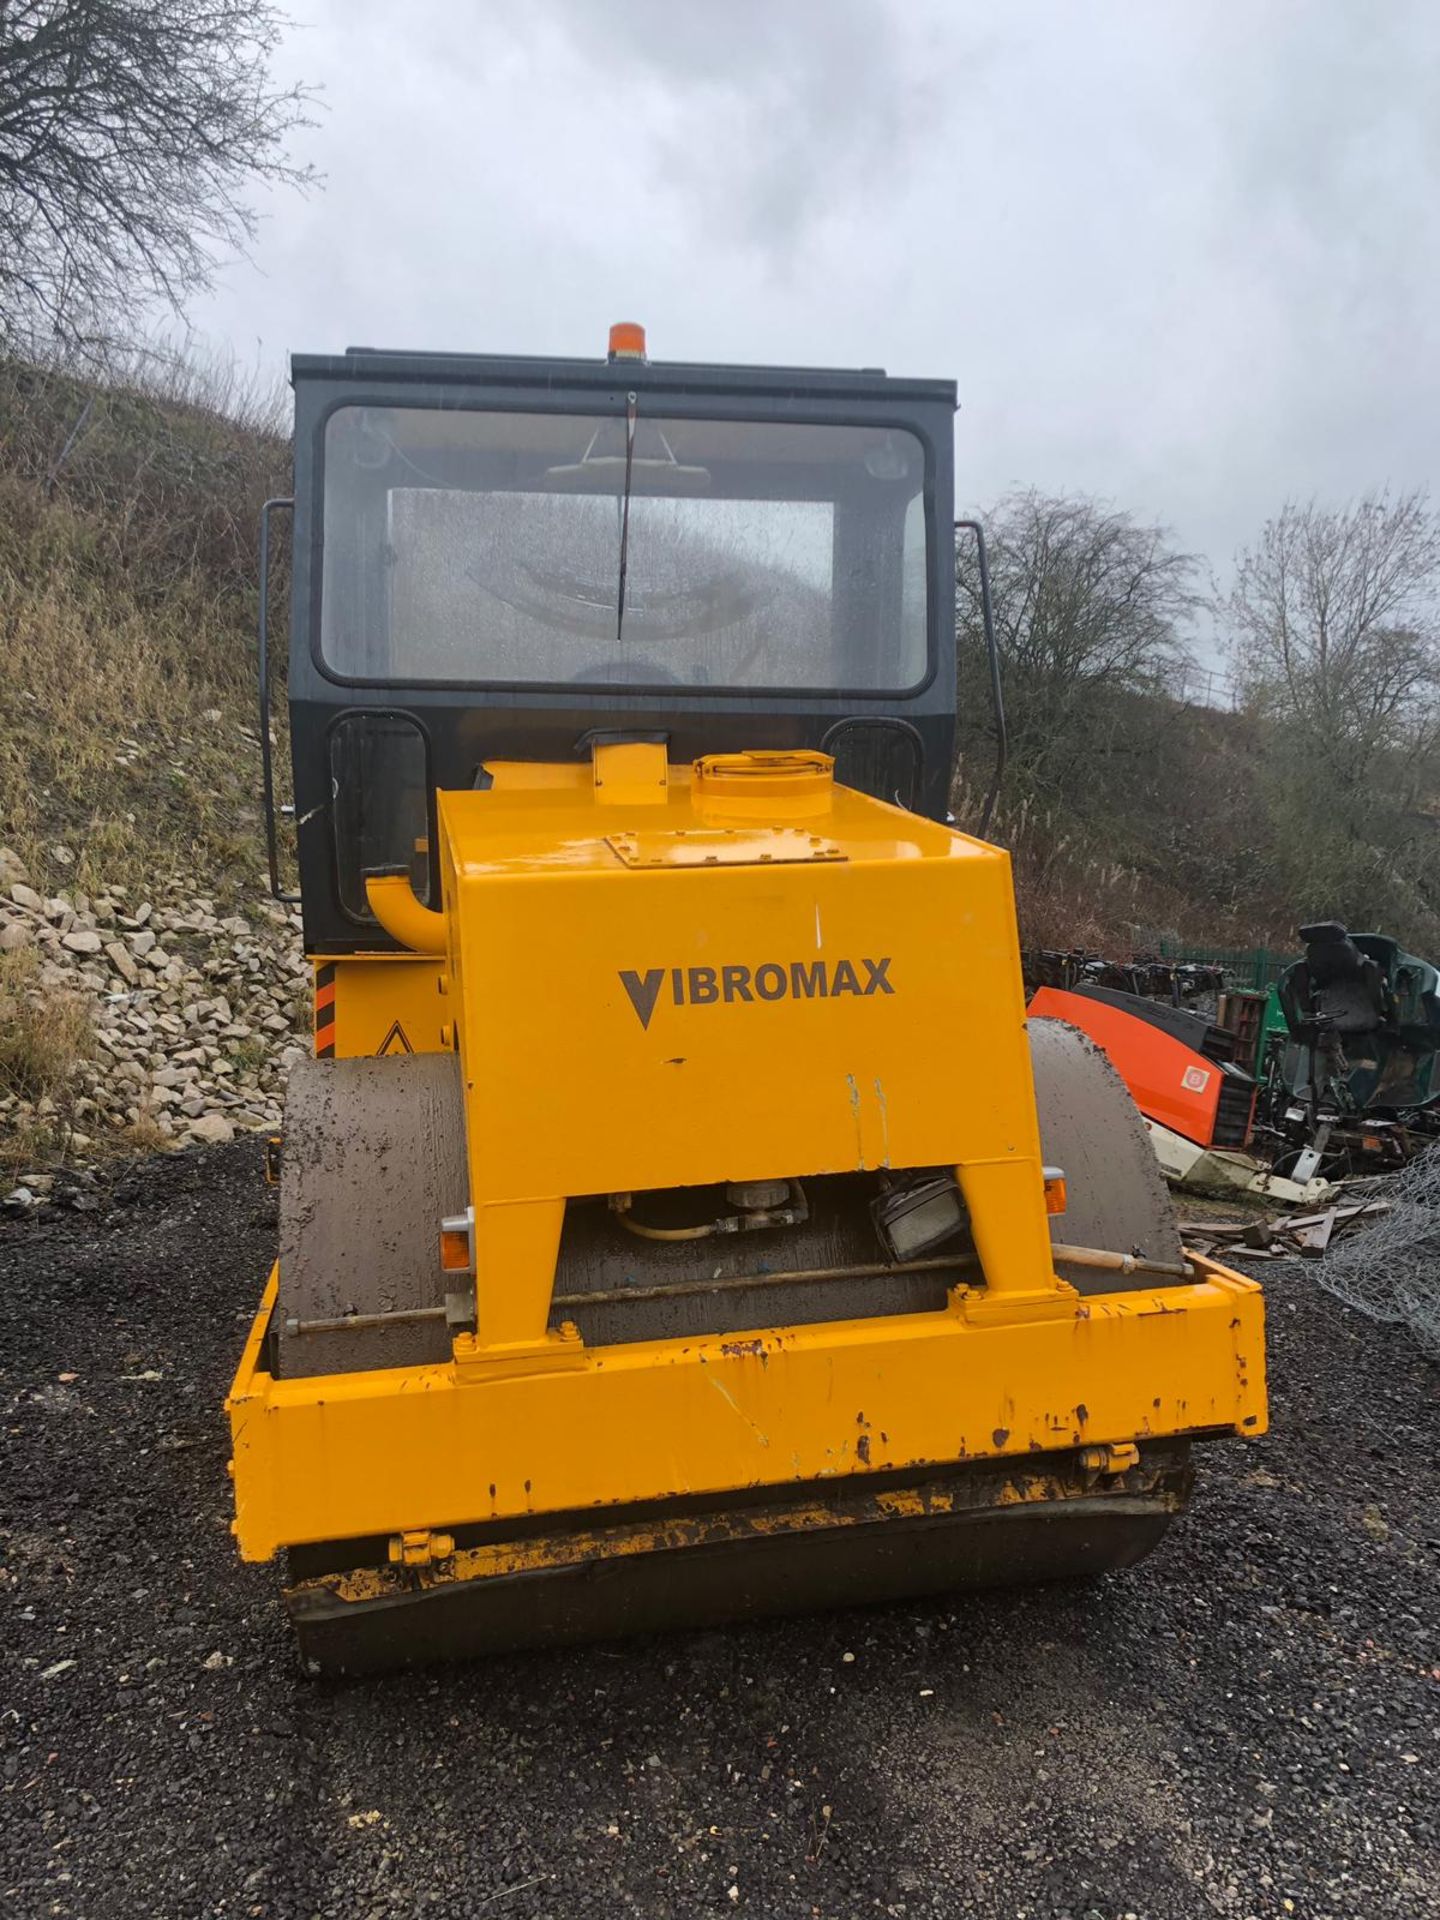 VIBROMAX W752 ROLLER, YEAR UNKNOWN, RUNS WORKS AND VIBRATES *PLUS VAT* - Image 3 of 6